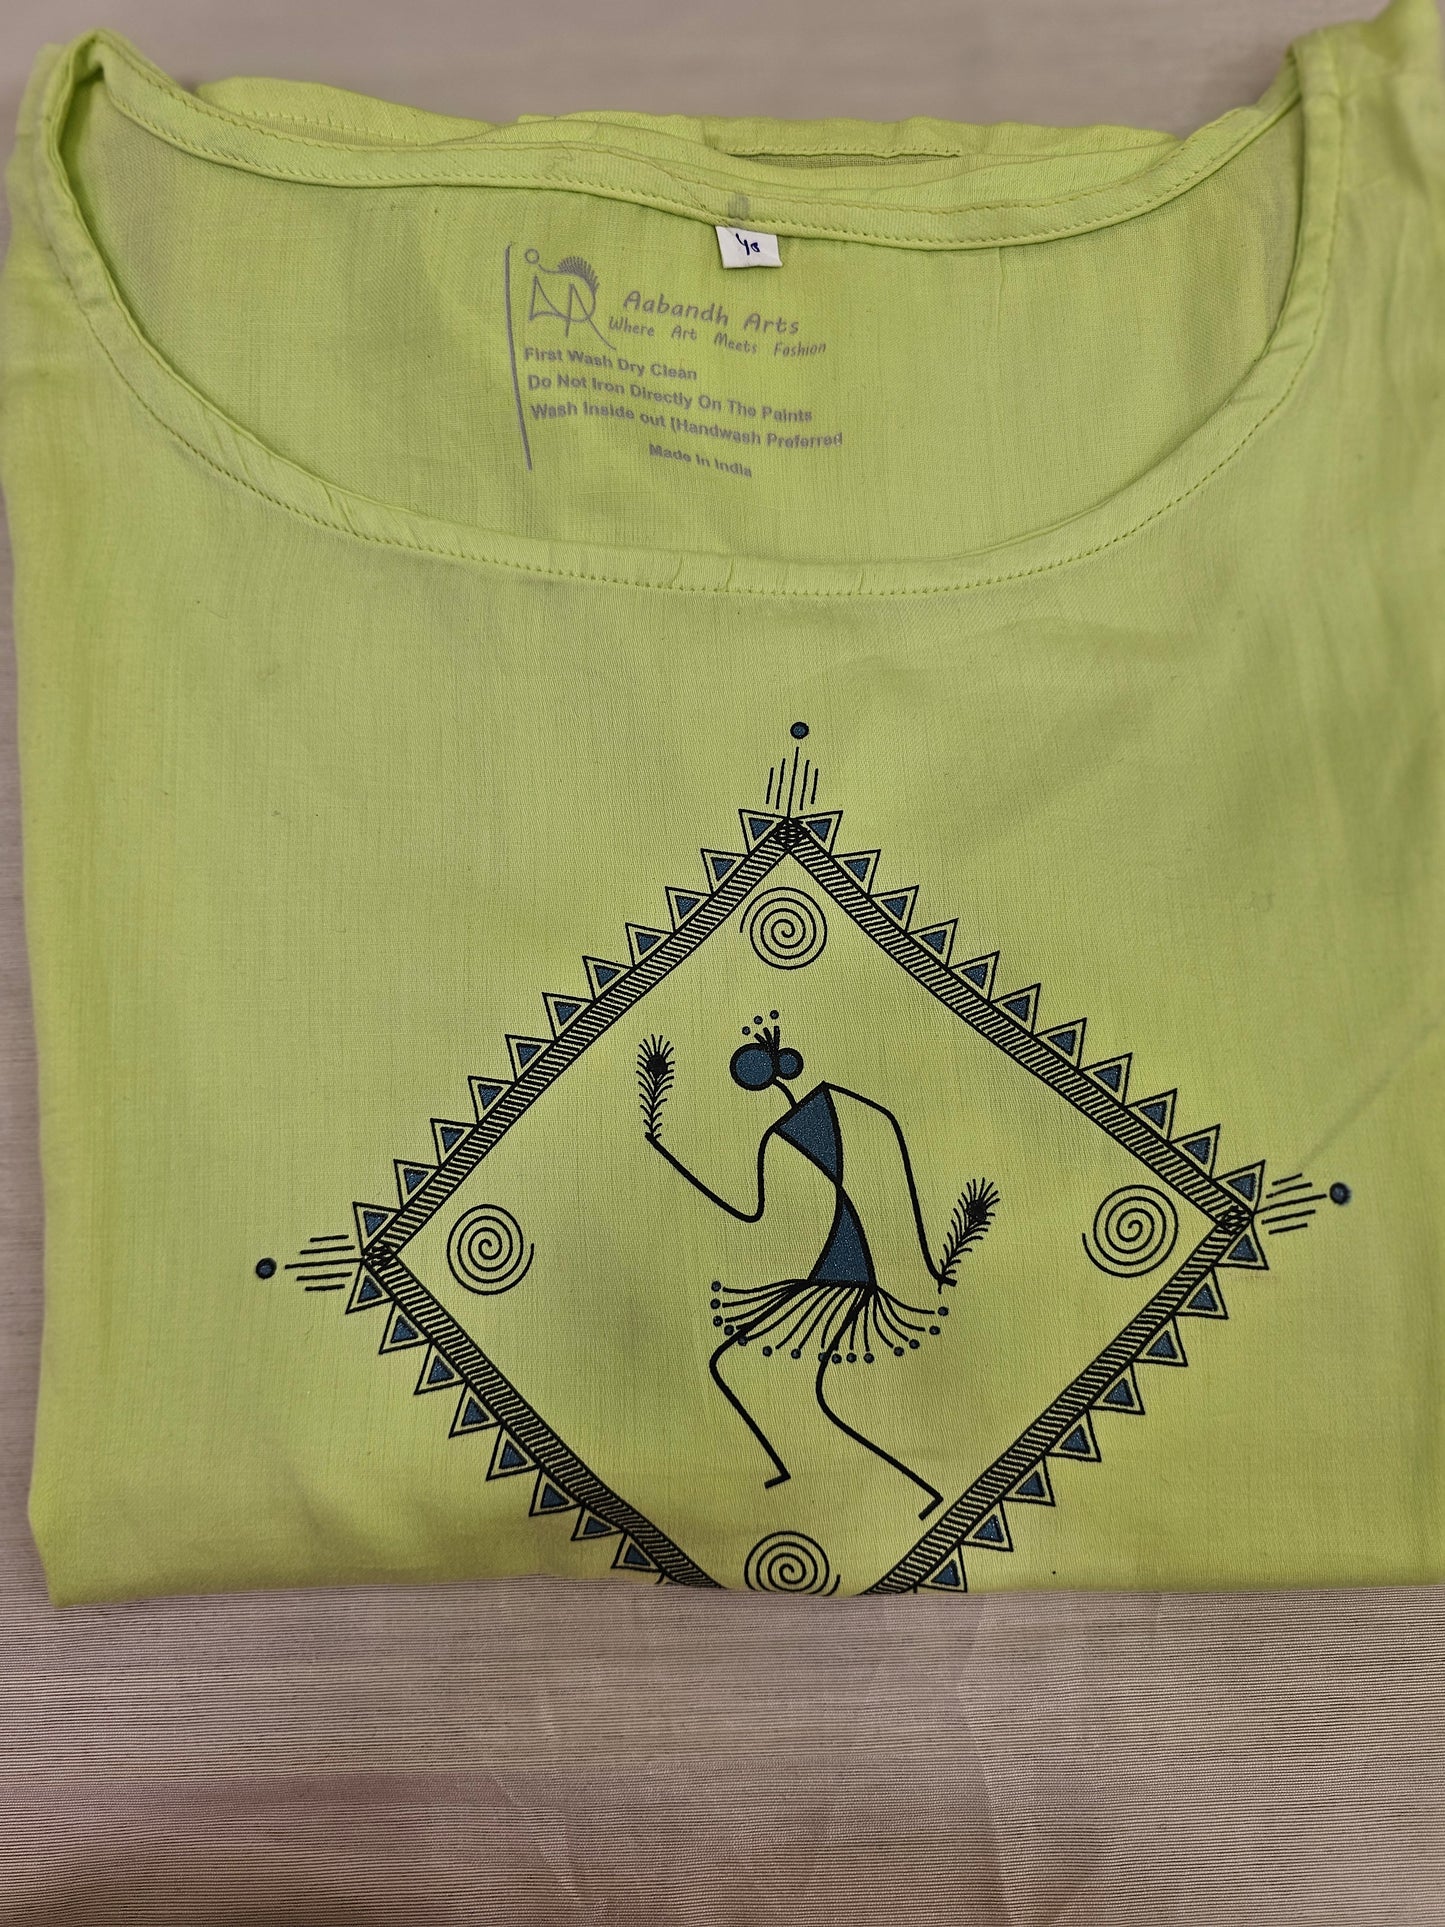 Aabandh's Sleevless Top - Warli ( Ruby Cotton )